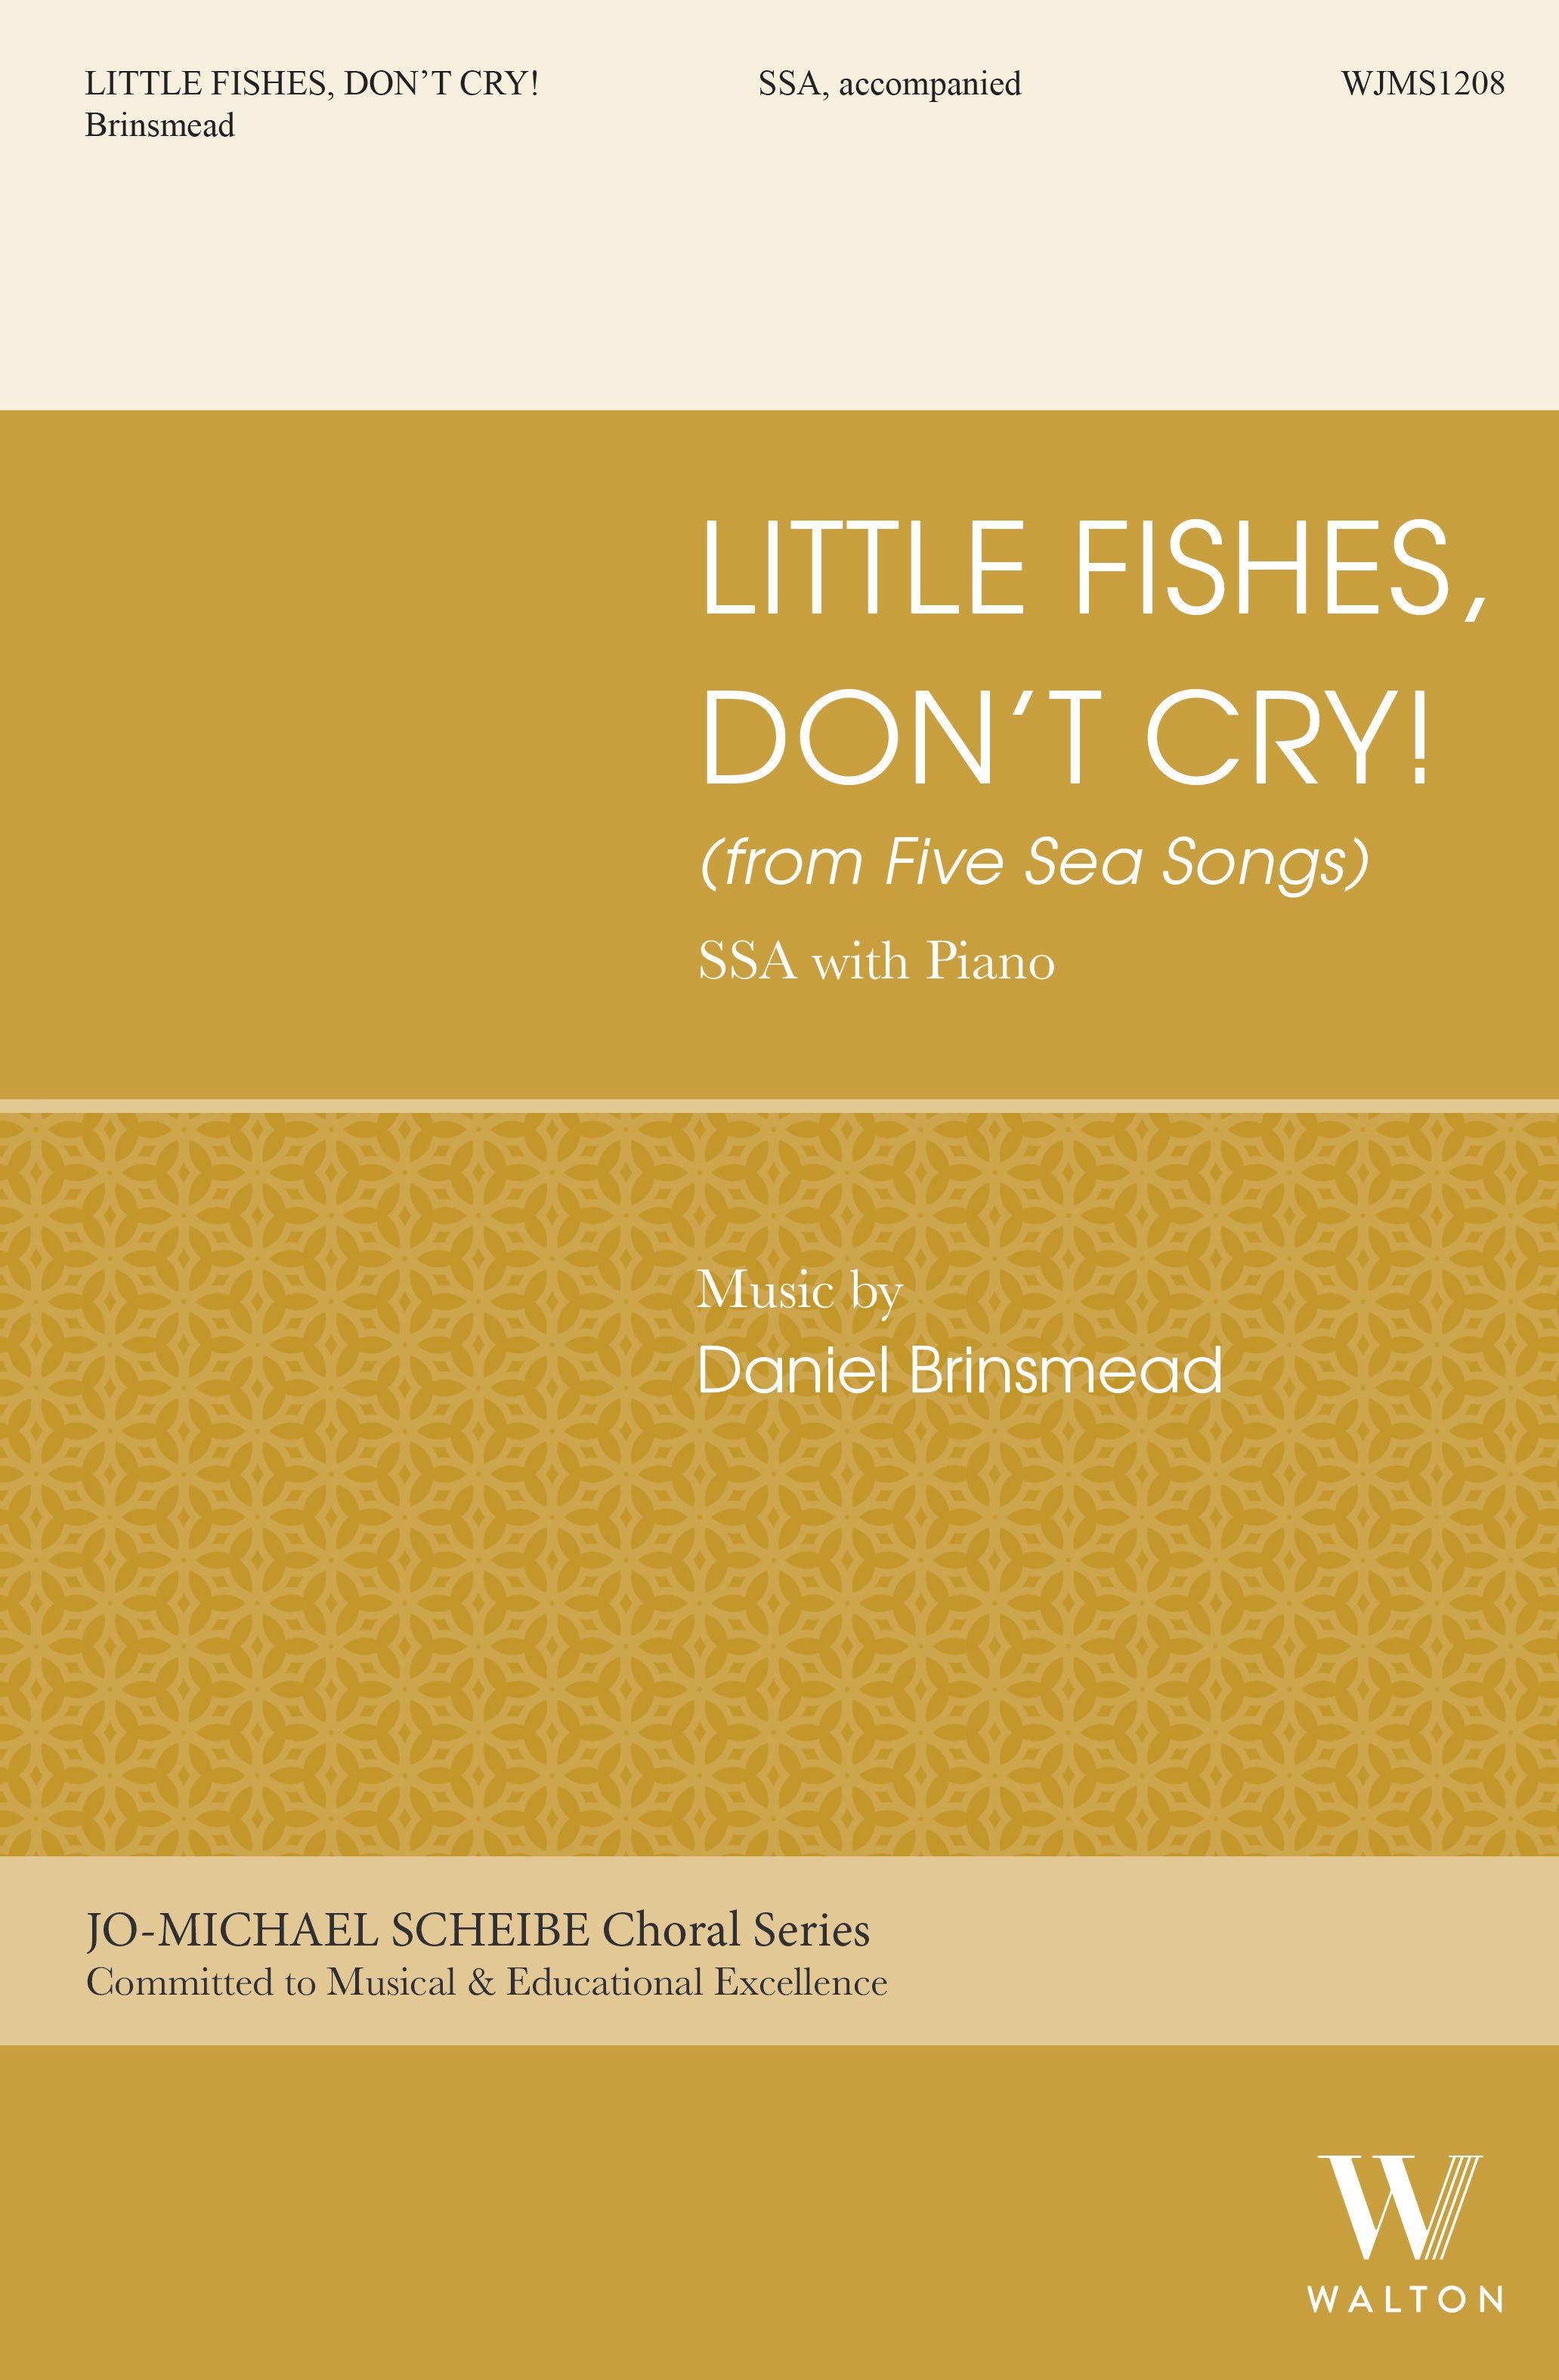 Little Fishes, Don't Cry!